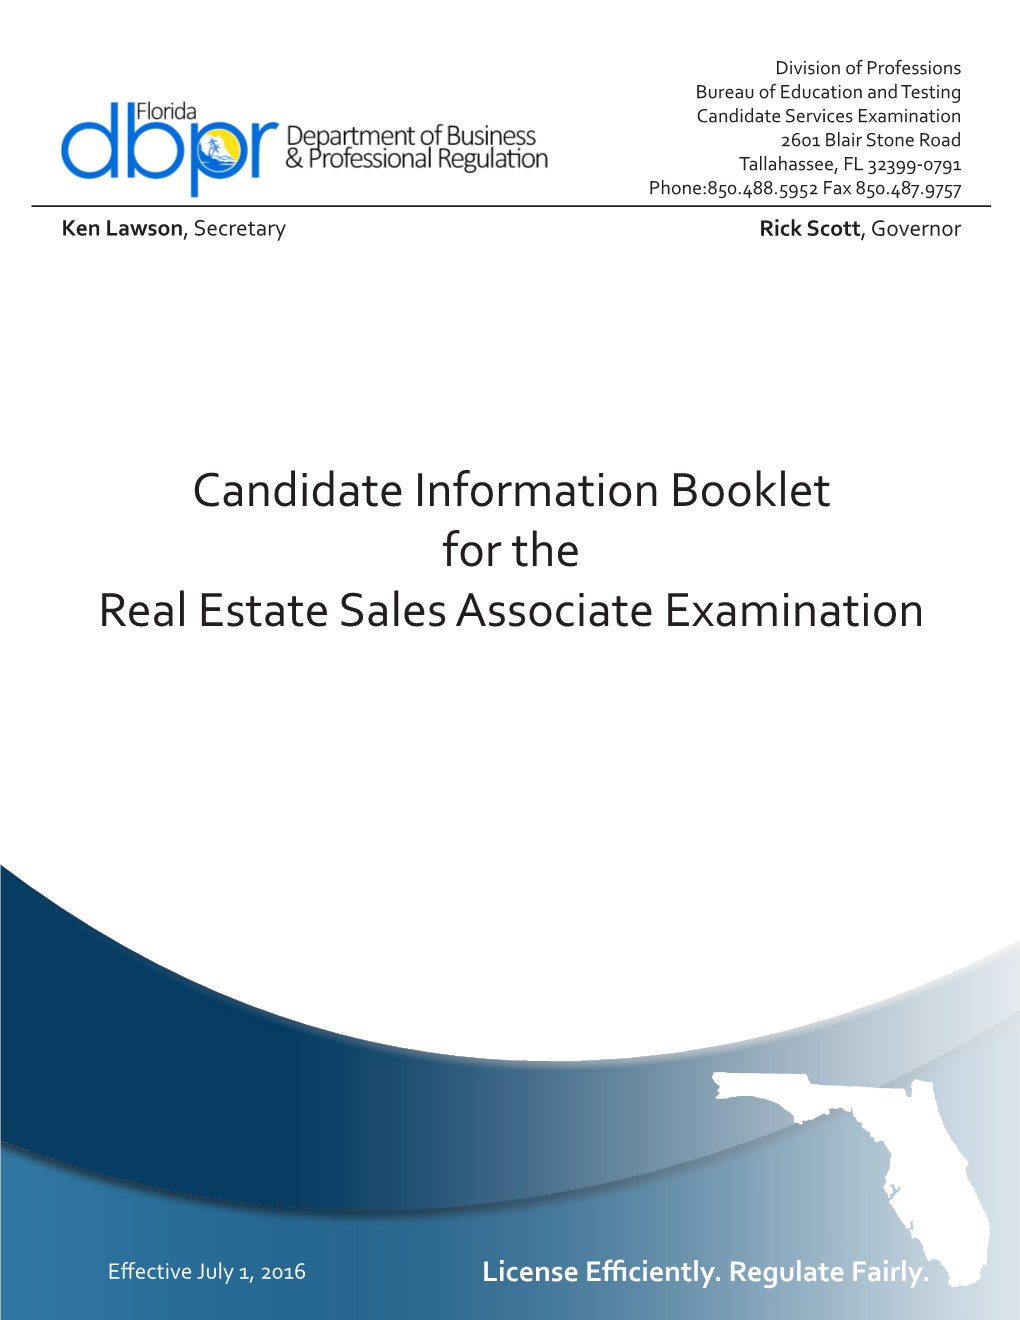 Candidate Information Booklet for the Real Estate Sales Associate